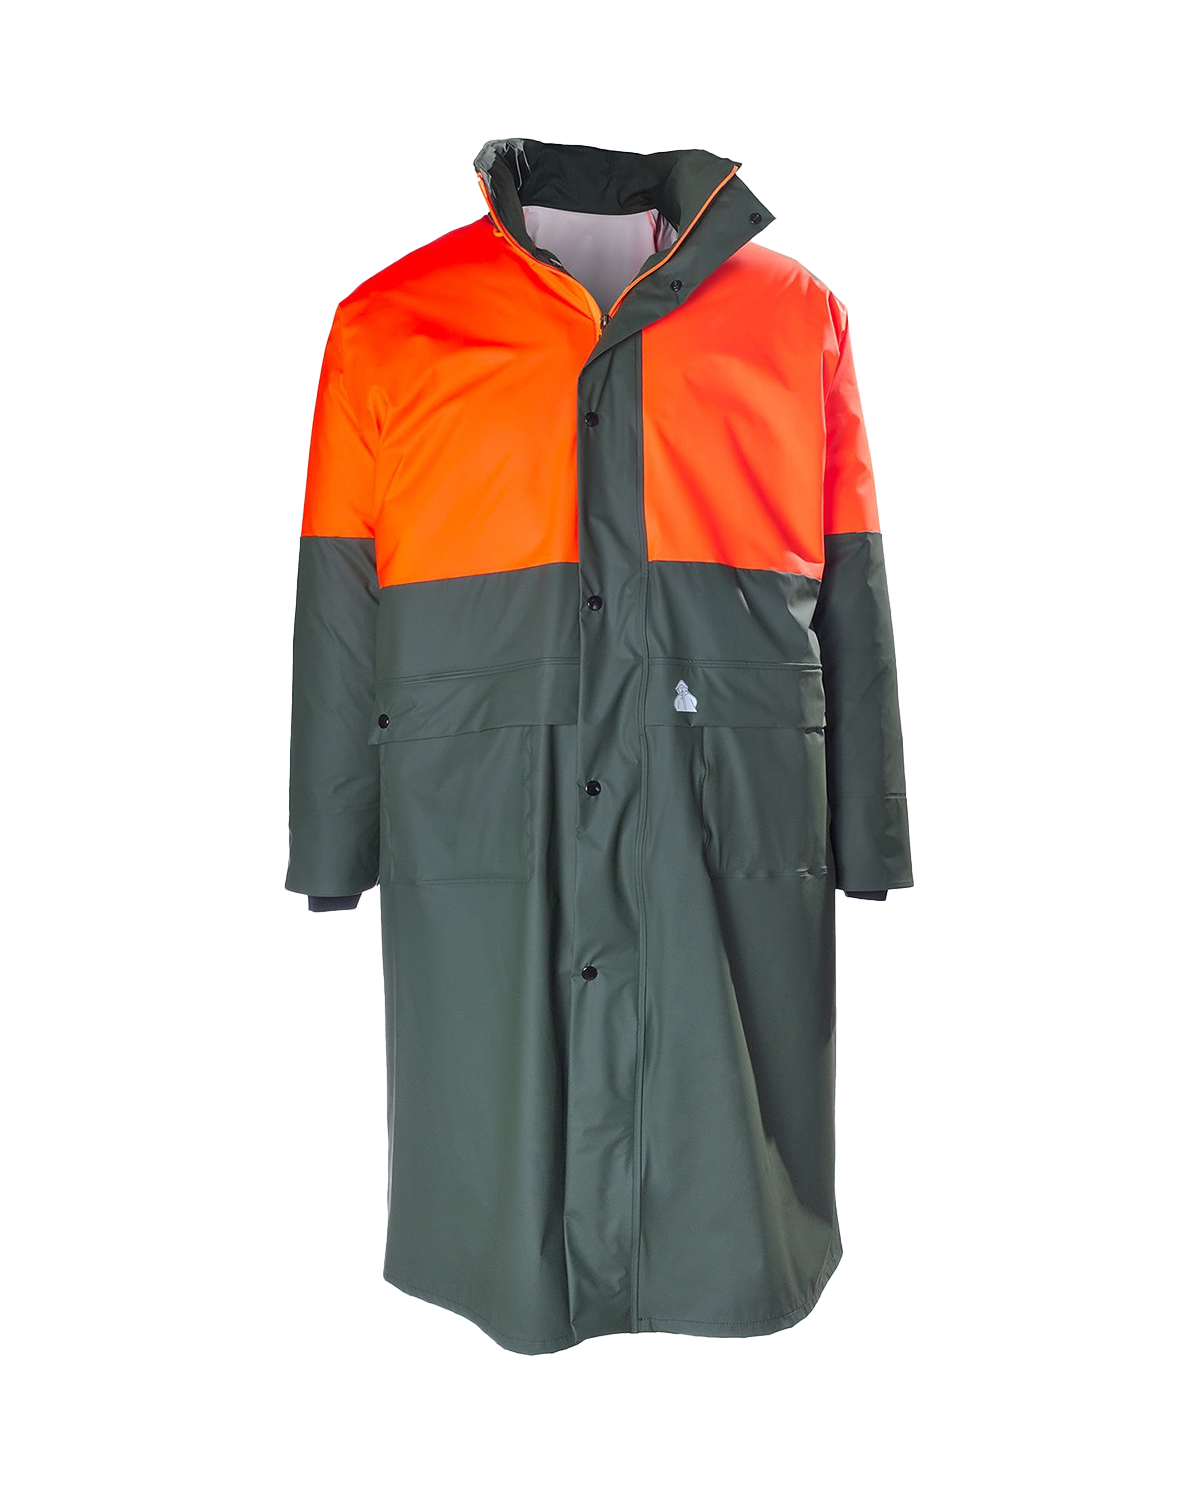 Impermeable Bicolor Caza